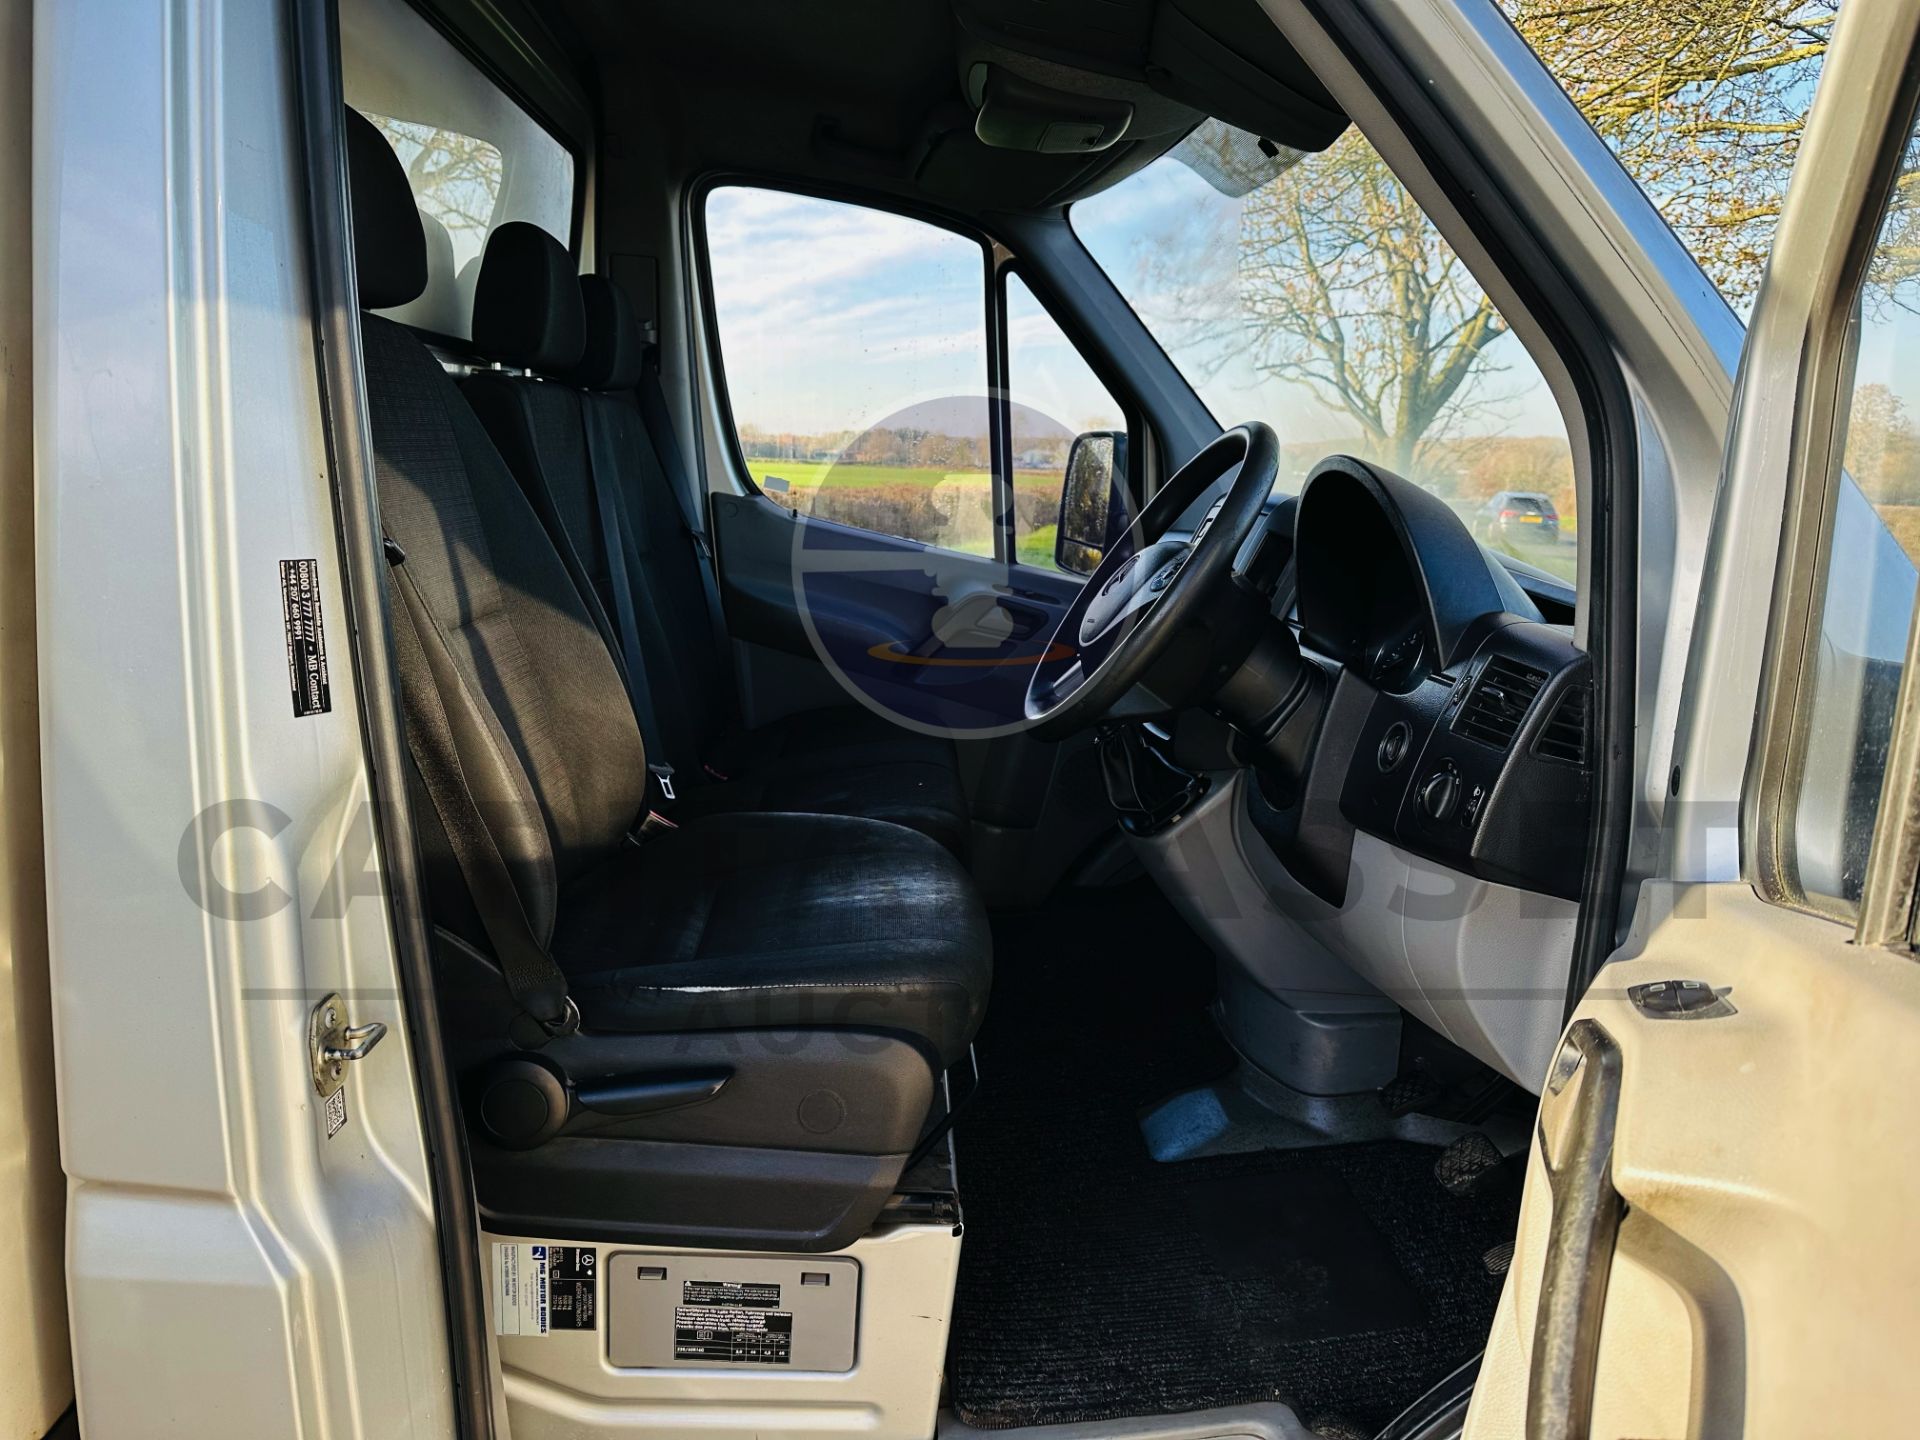 MERCEDES-BENZ SPRINTER 313 CDI - *LWB CURTAINSIDER TRUCK* - 2016 MODEL - 3 SEATER CABIN - AIR CON!!! - Image 14 of 26